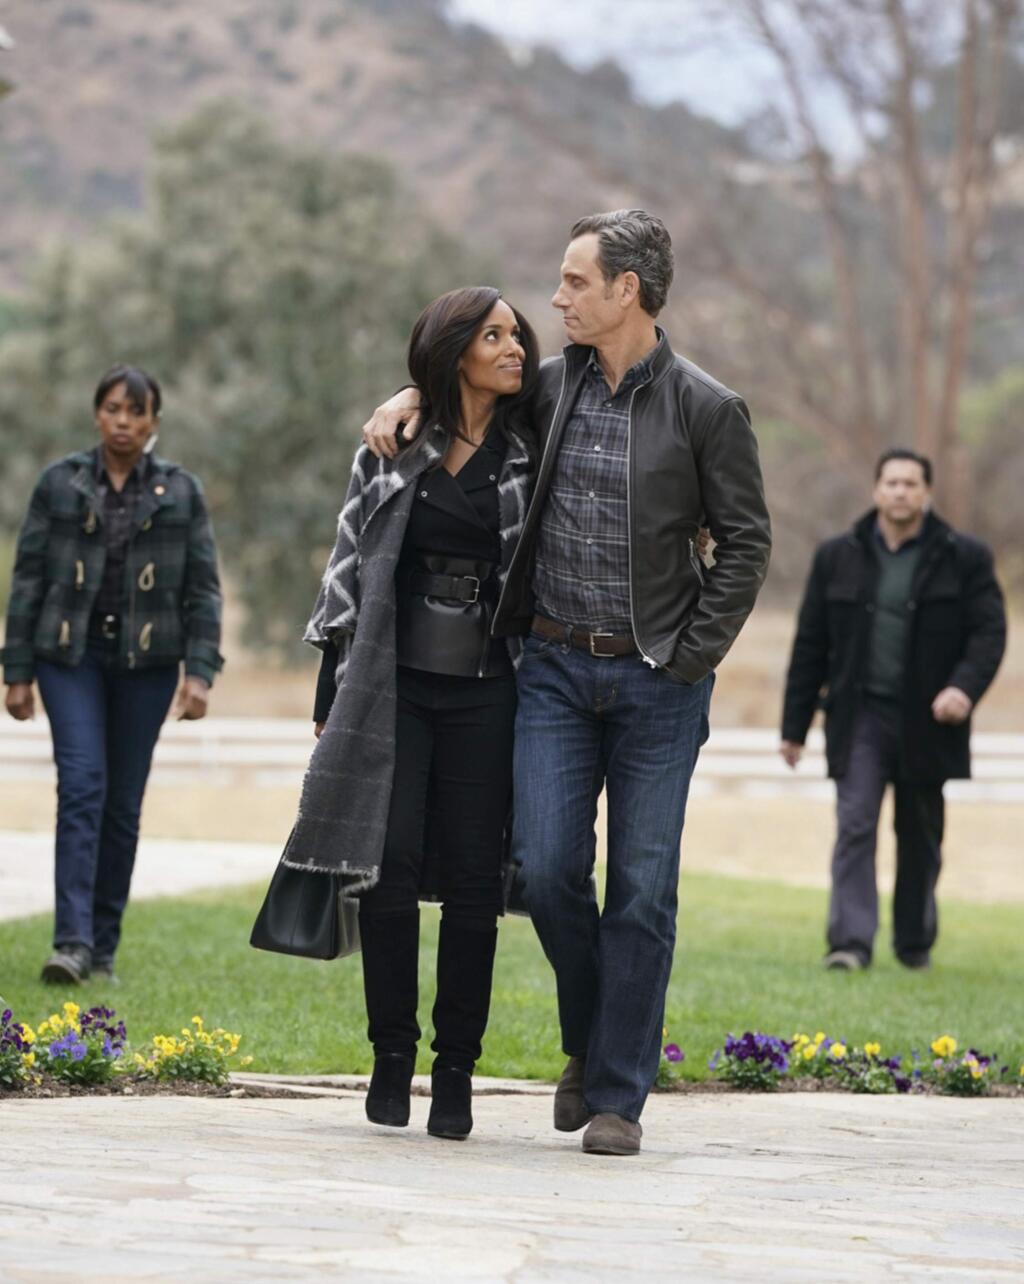 This image released by ABC shows Kerry Washington, left, and Tony Goldwyn in a scene from 'Scandal.' After seven seasons, the popular series will end on Thursday, April 19. (Mitch Haaseth/ABC via AP)